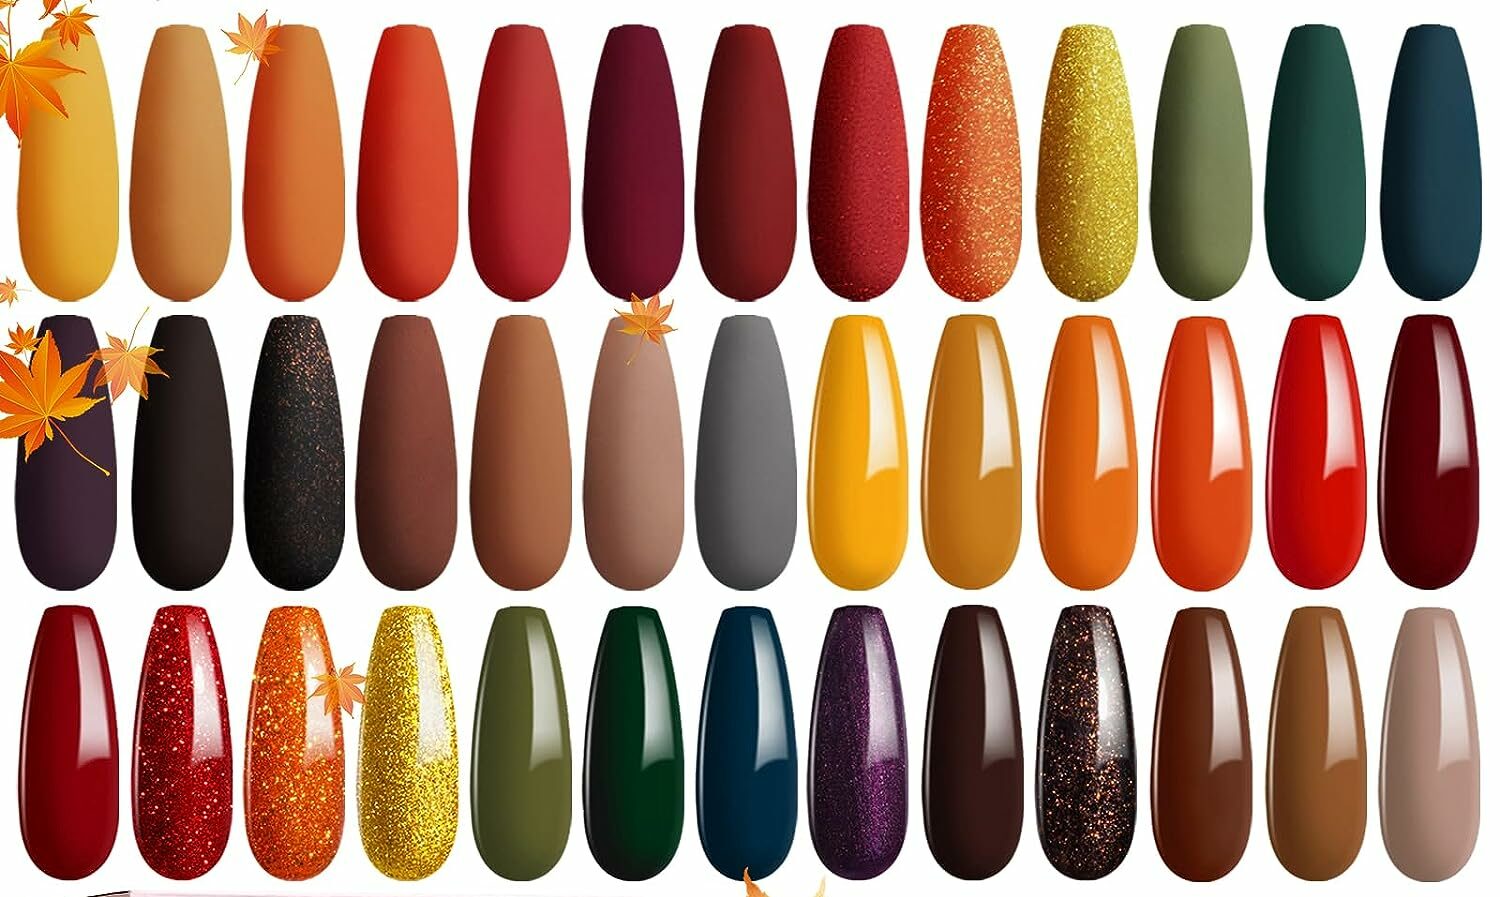 10. "The Must-Have Nail Colors for May: From Classic to Trendy" - wide 4